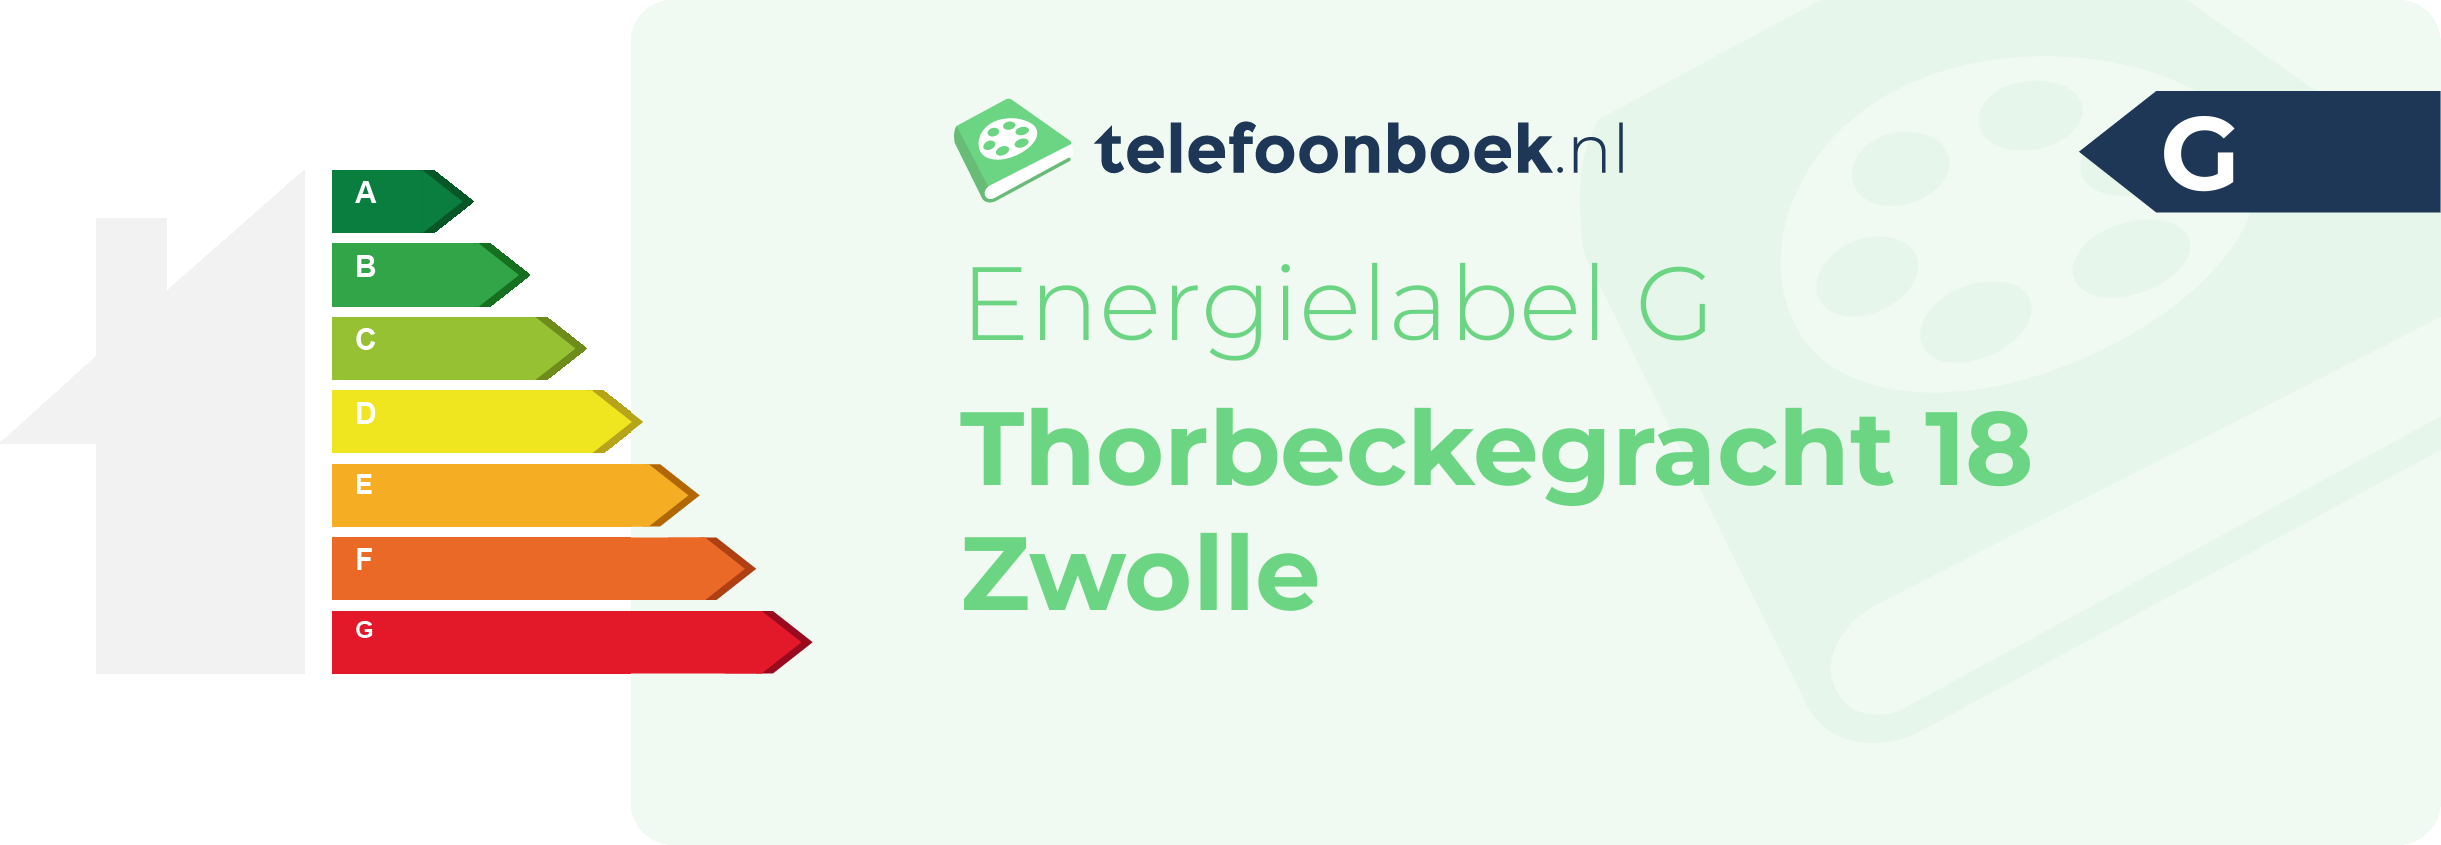 Energielabel Thorbeckegracht 18 Zwolle